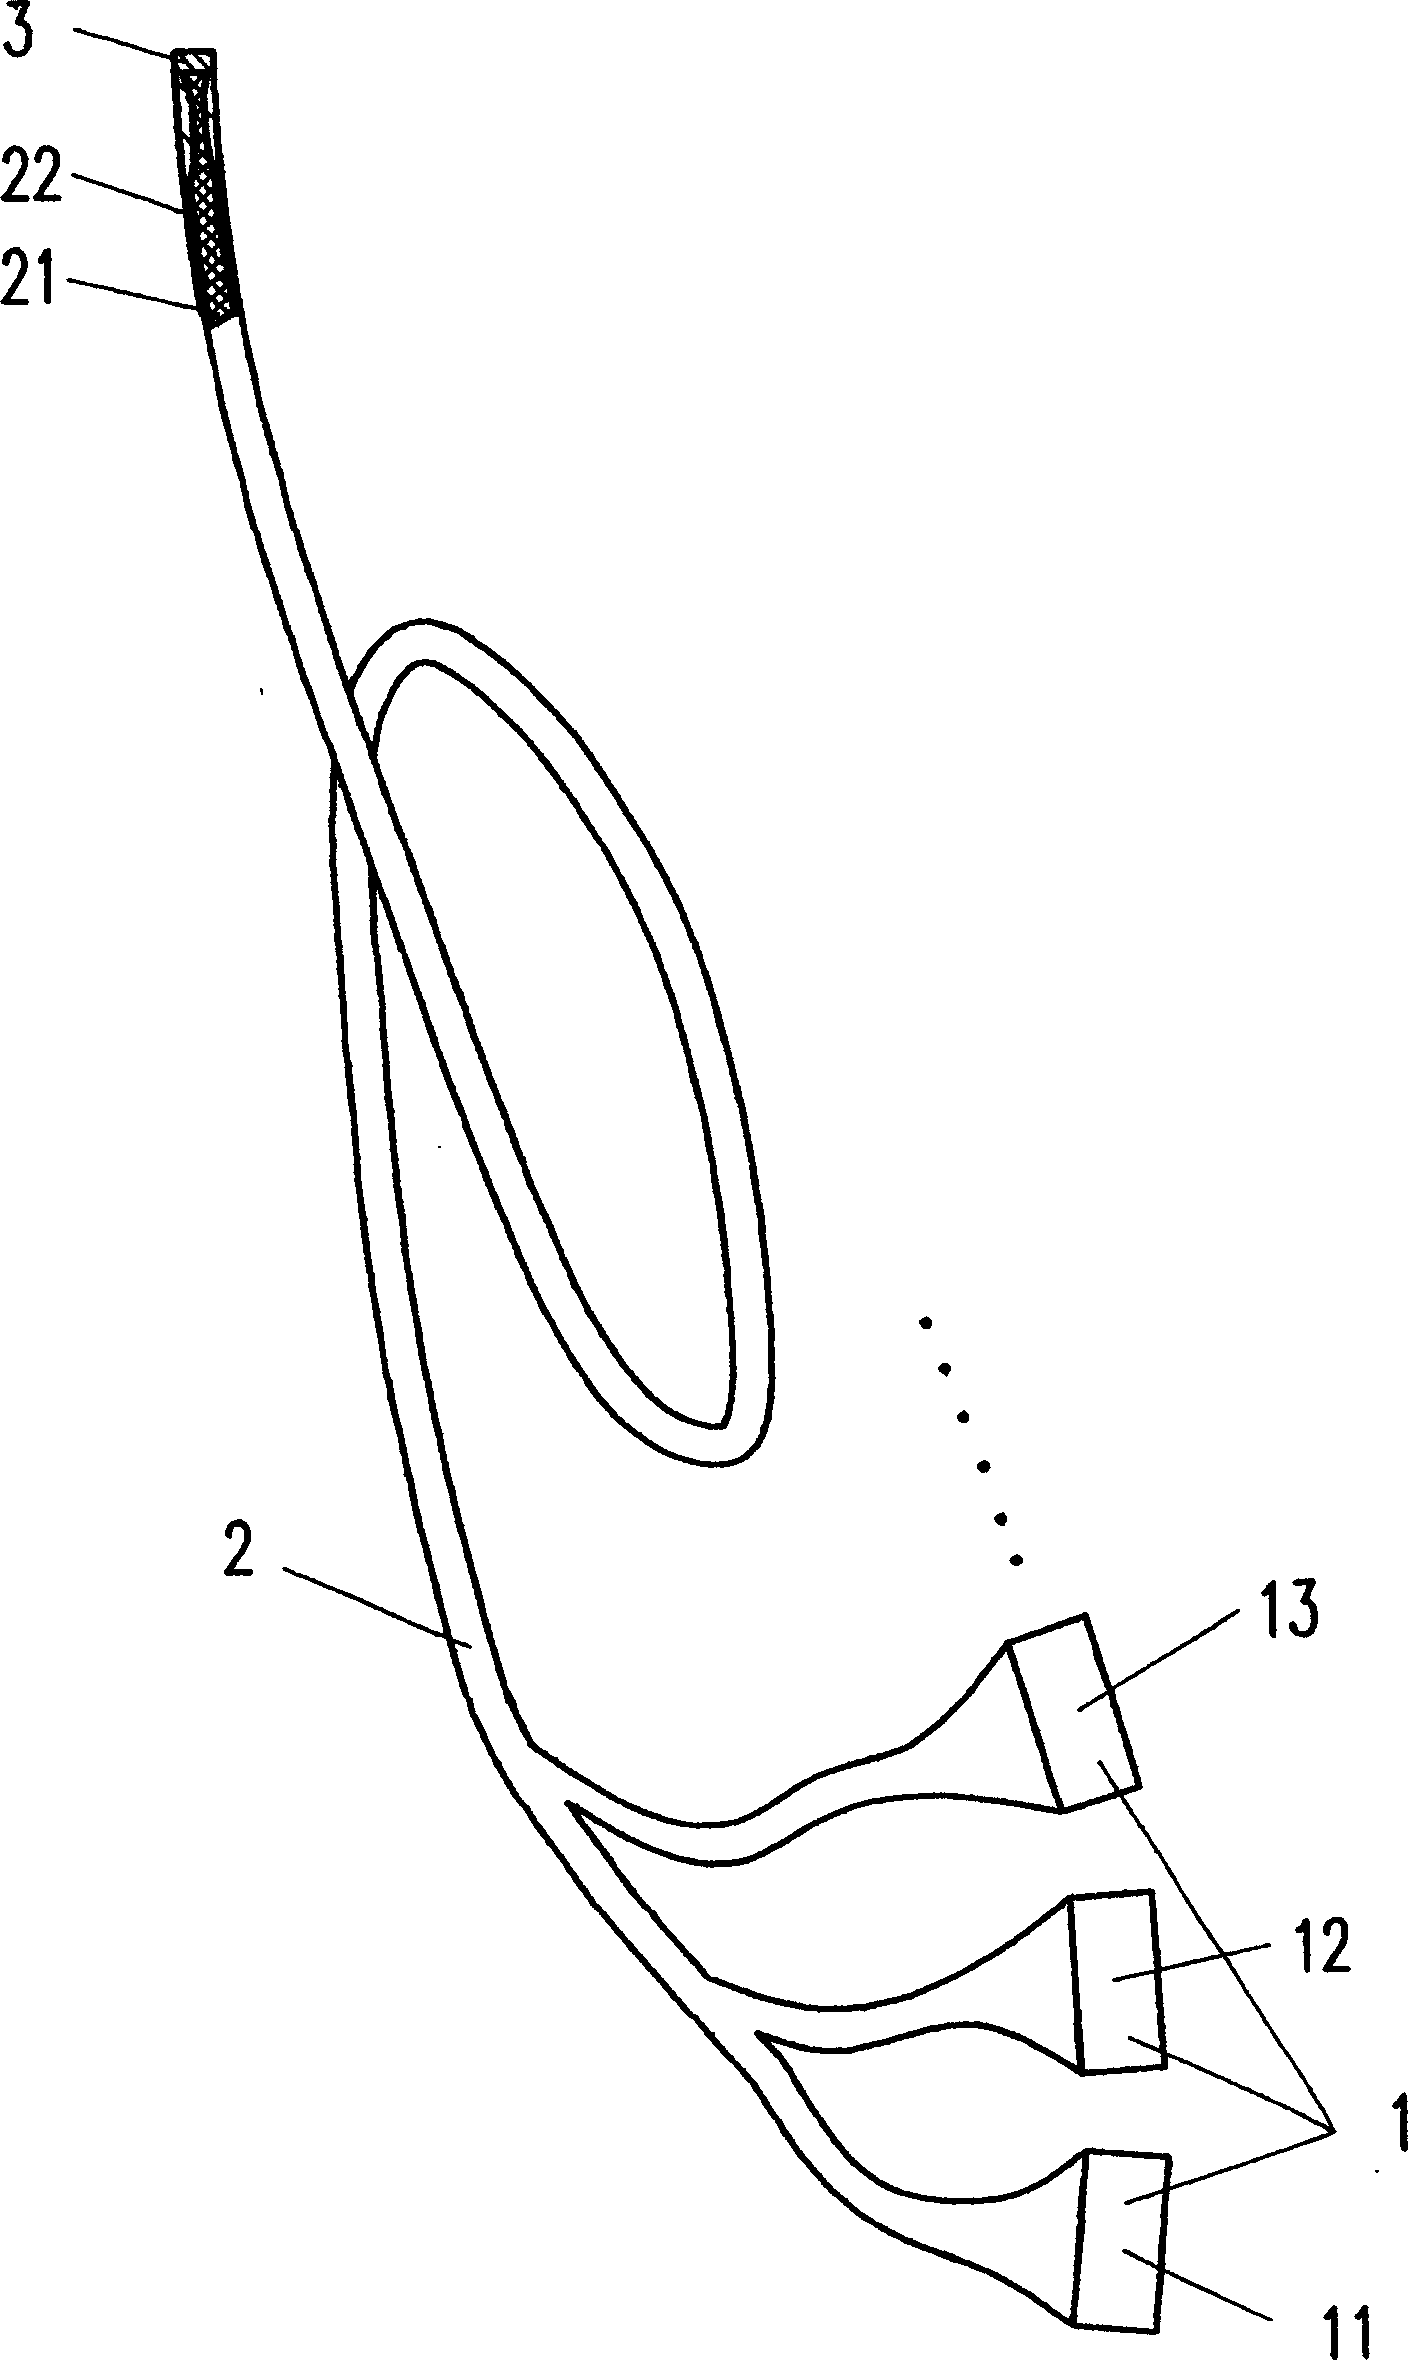 Supersonic wave waveguide device